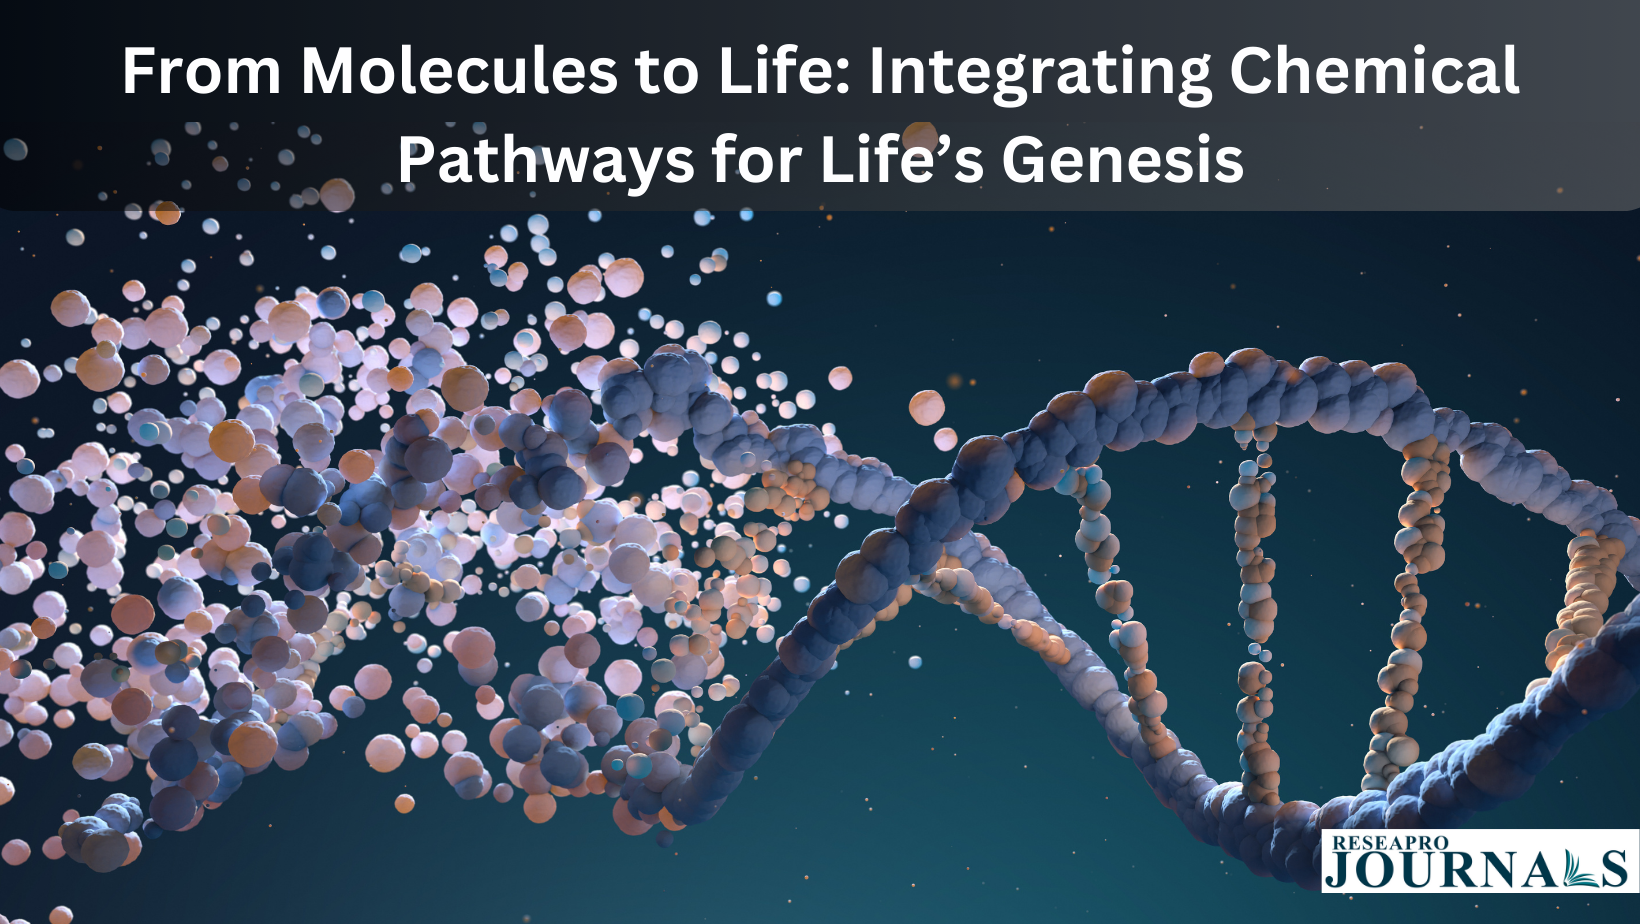 From Molecules to Life: Integrating Chemical Pathways for Life’s Genesis